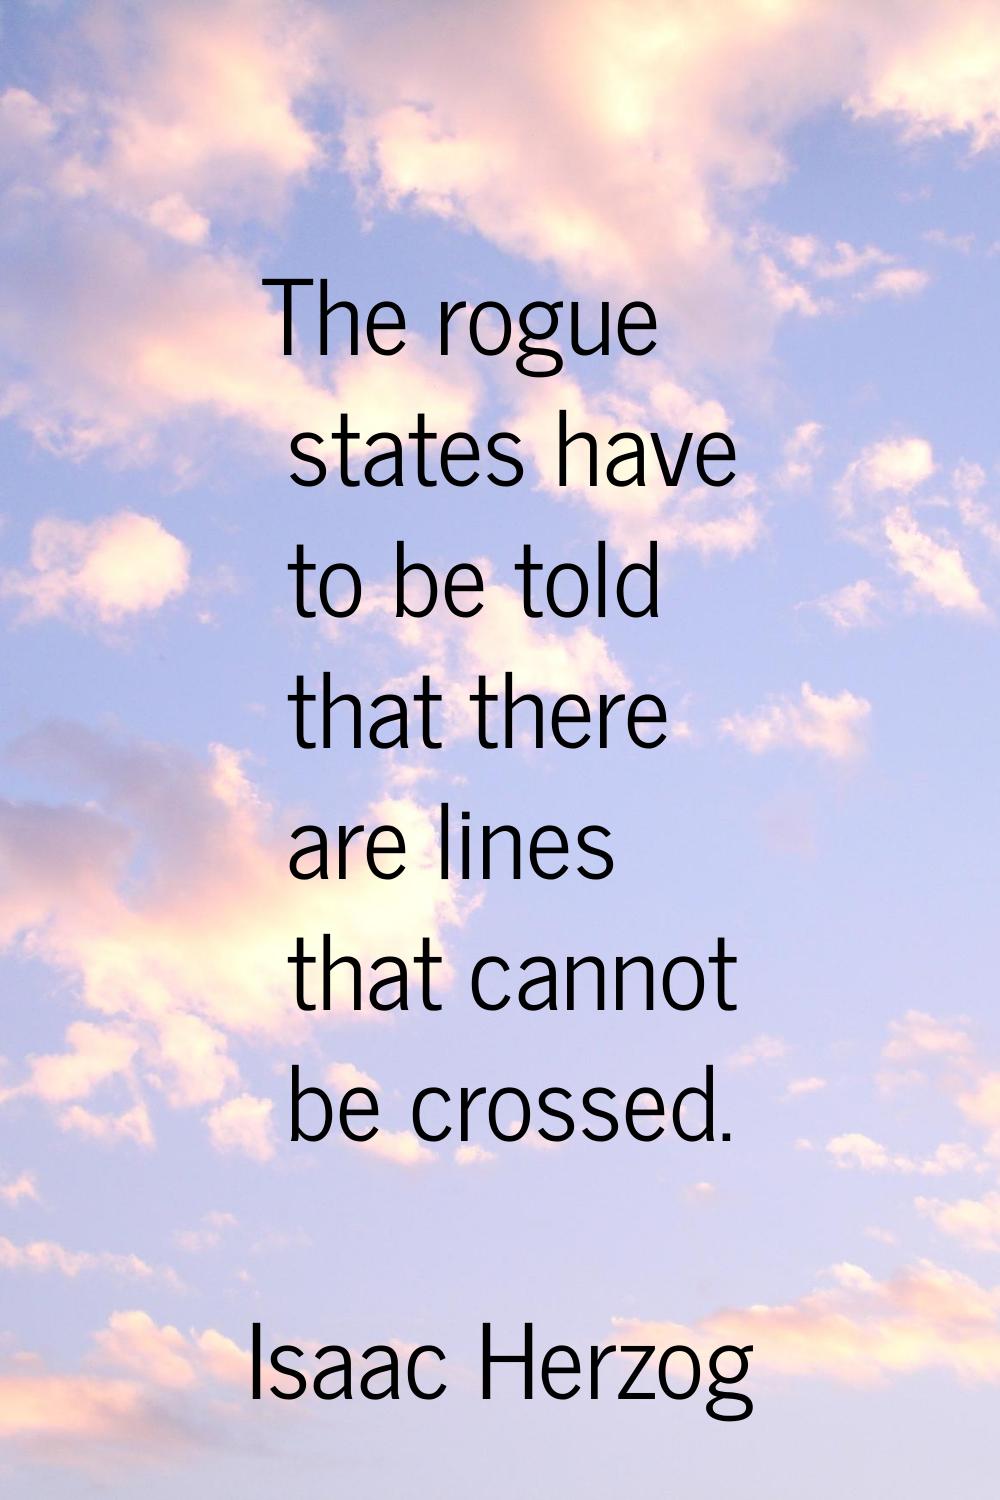 The rogue states have to be told that there are lines that cannot be crossed.